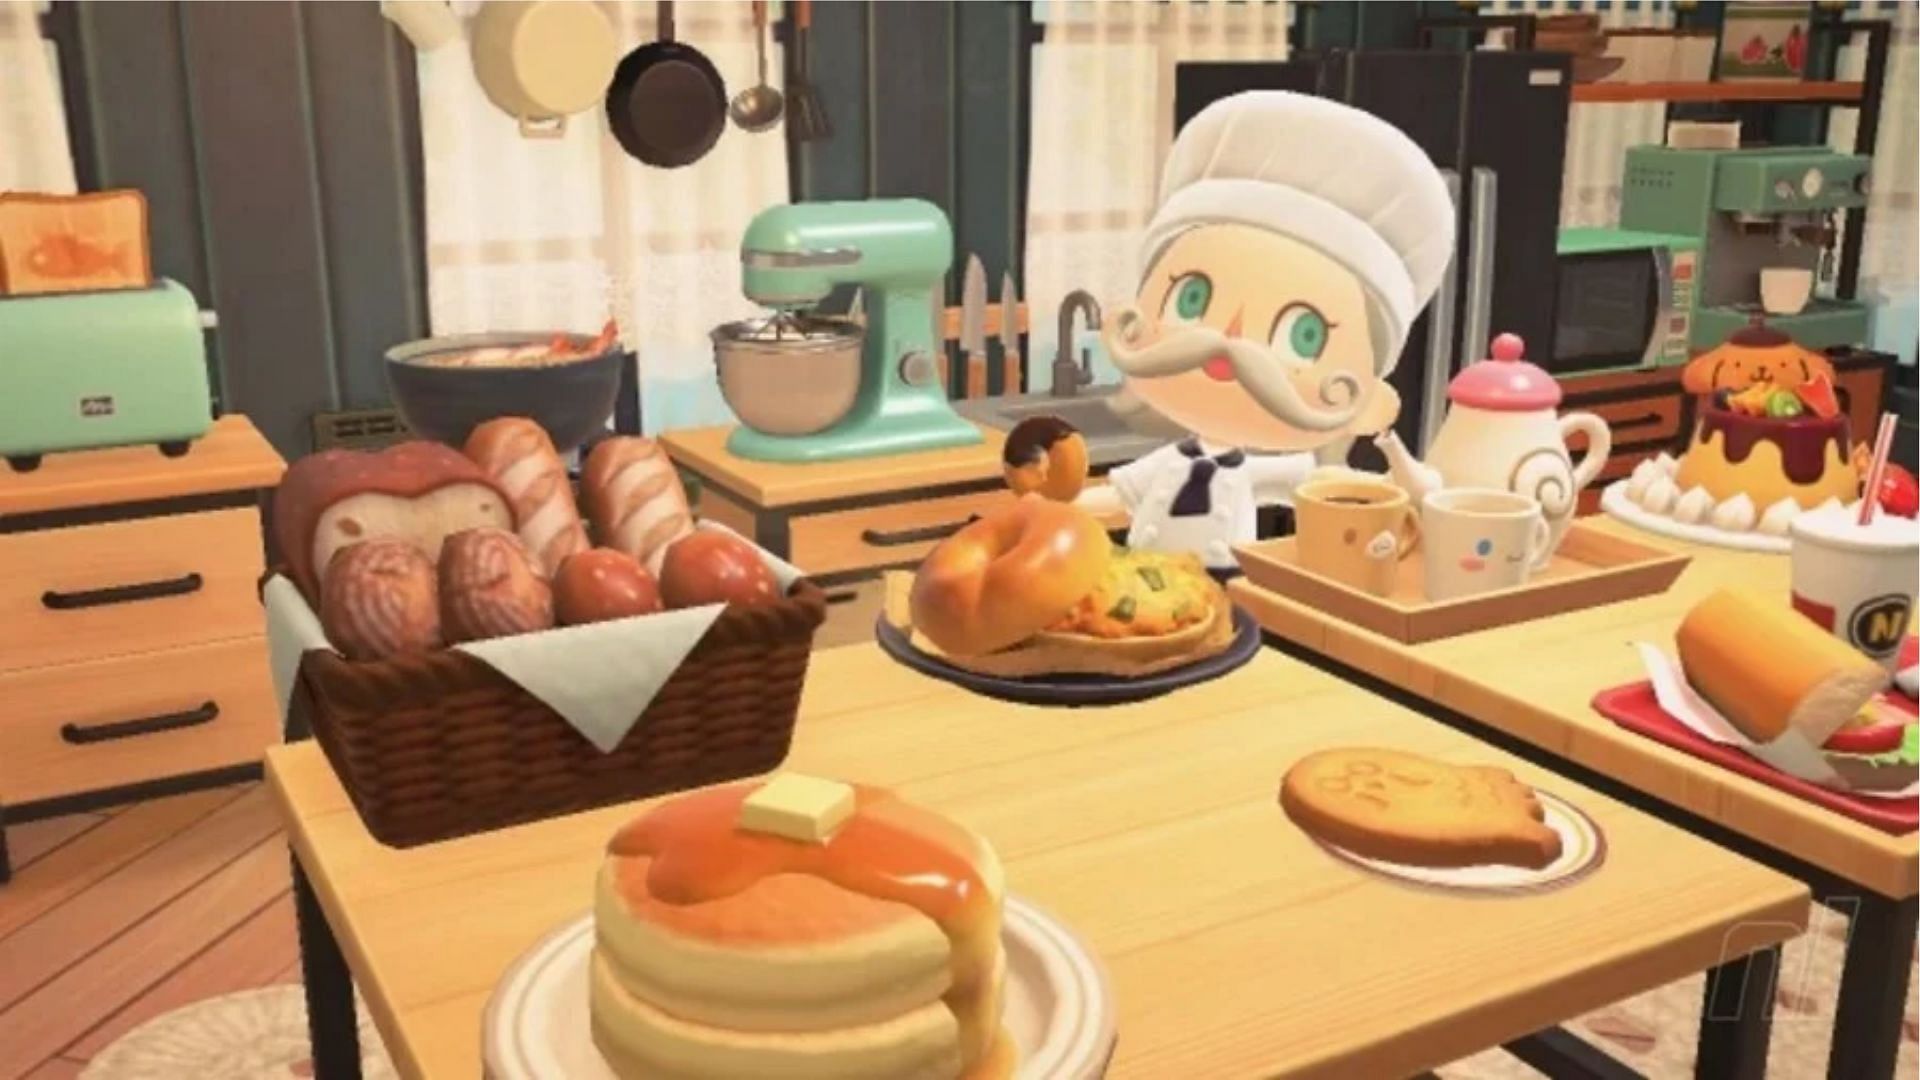 Cooking was recently introduced as a feature in Animal Crossing: New Horizons (Image via Nintendo Life)